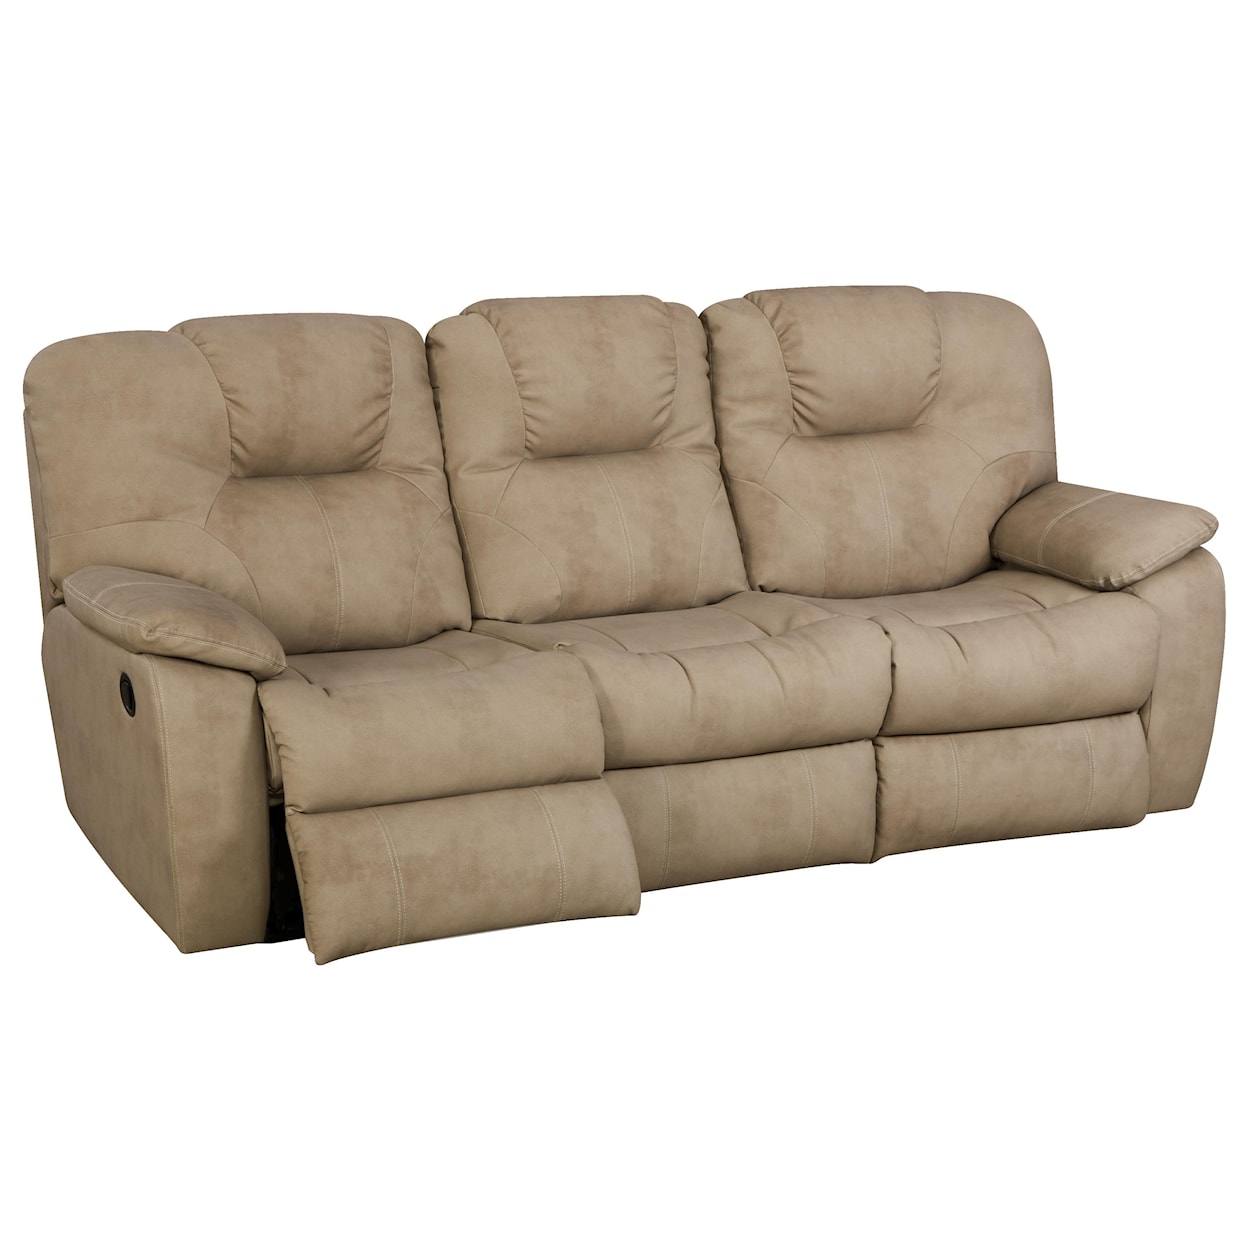 Powell's Motion Avalon Power Sofa with Drop Down Table